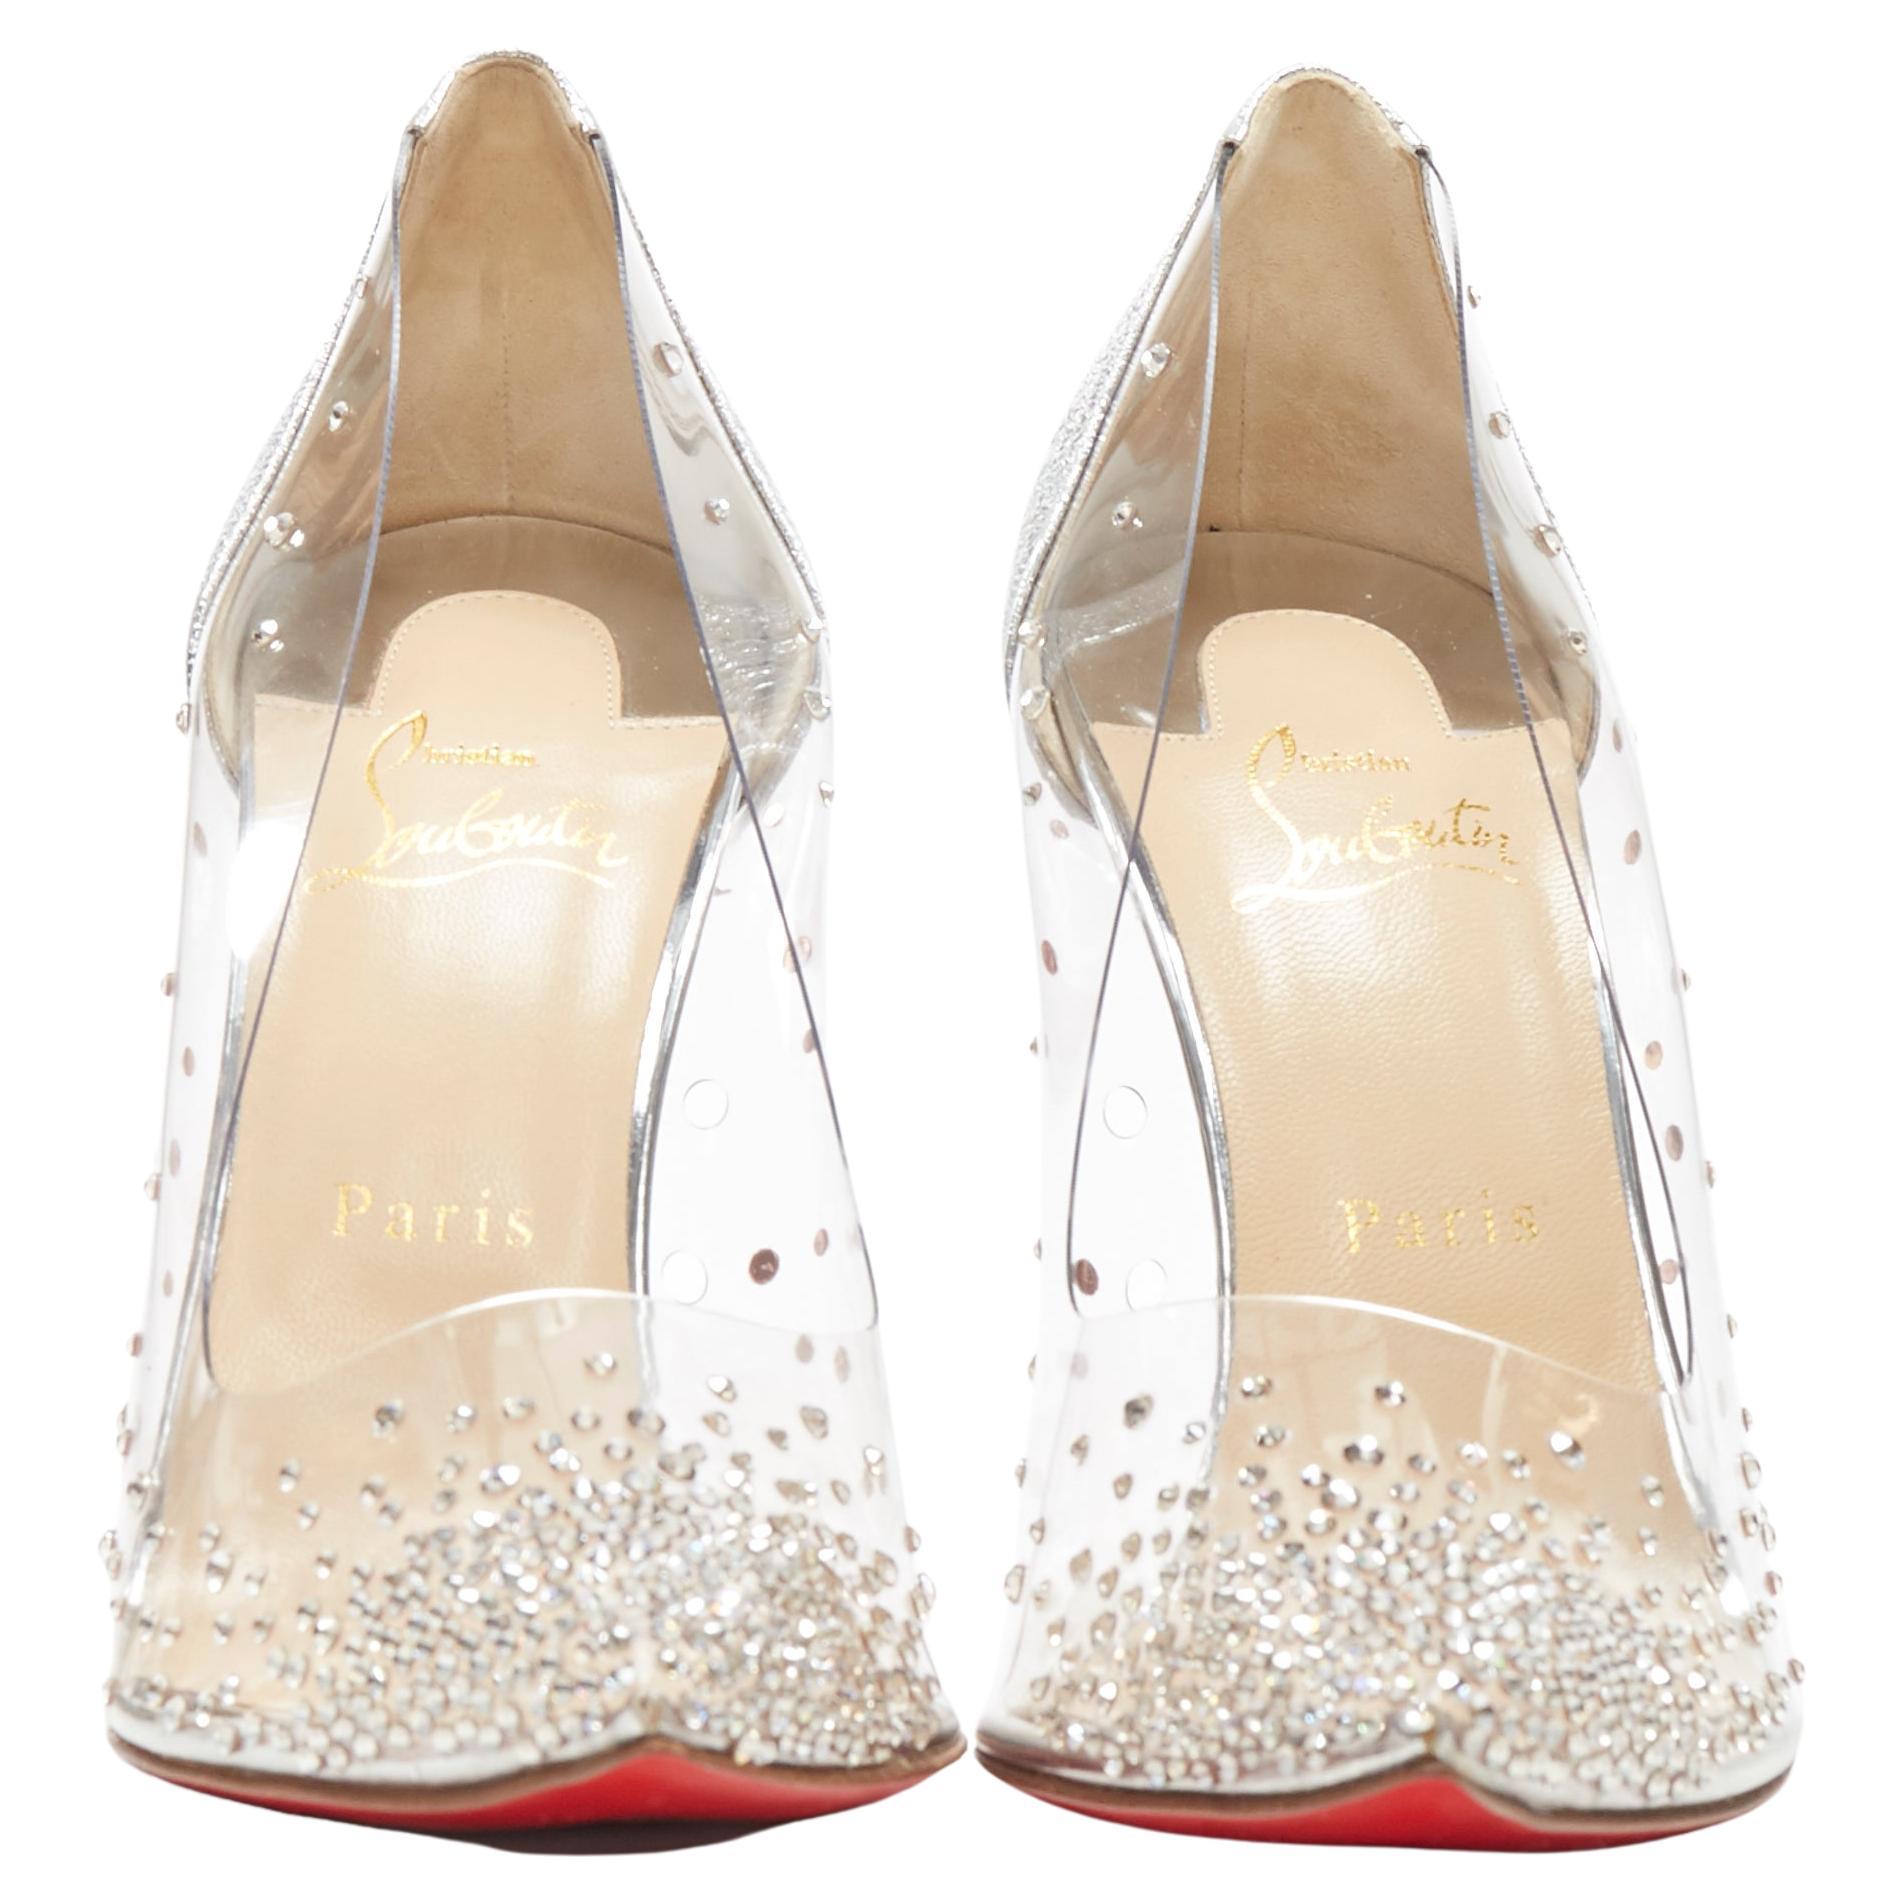 new CHRISTIAN LOUBOUTIN Degrastrass 100 clear PVC silver strass bridal pump EU40 
Reference: TGAS/A04409 
Brand: Christian Louboutin 
Designer: Christian Louboutin 
Model: Degrastrass 100 
Material: PVC 
Color: Silver 
Pattern: Solid 
Extra Detail: